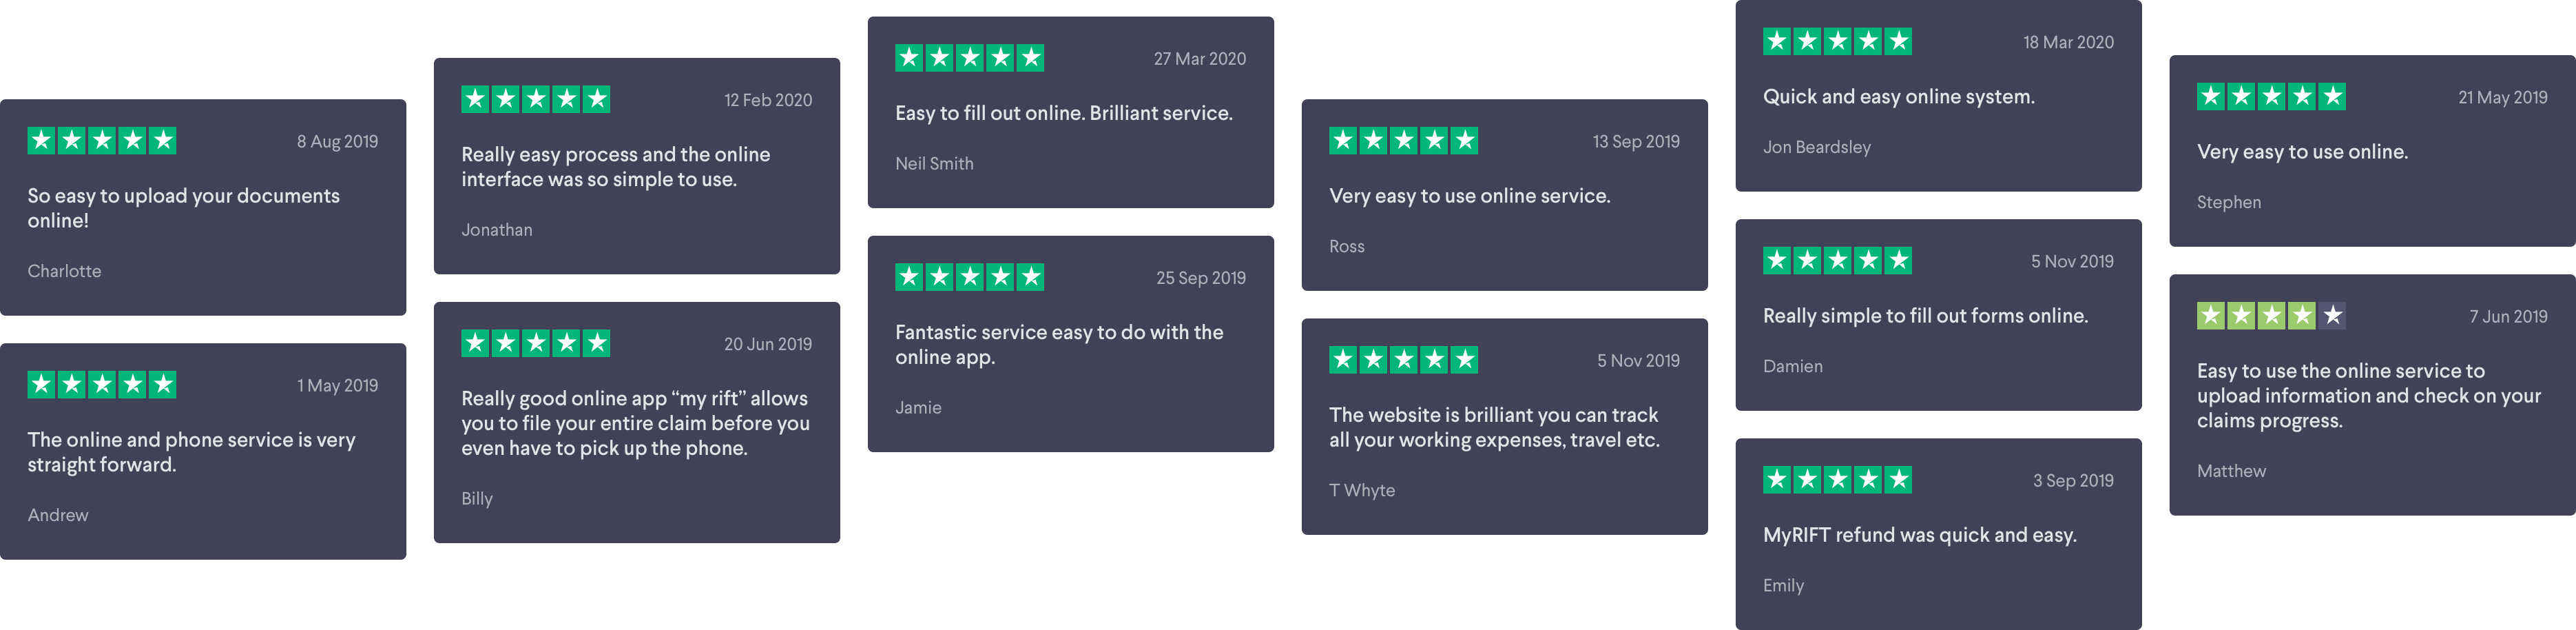 A collection of positive Trustpilot reviews. They all show a five star rating except for one, which offers a four star rating instead.